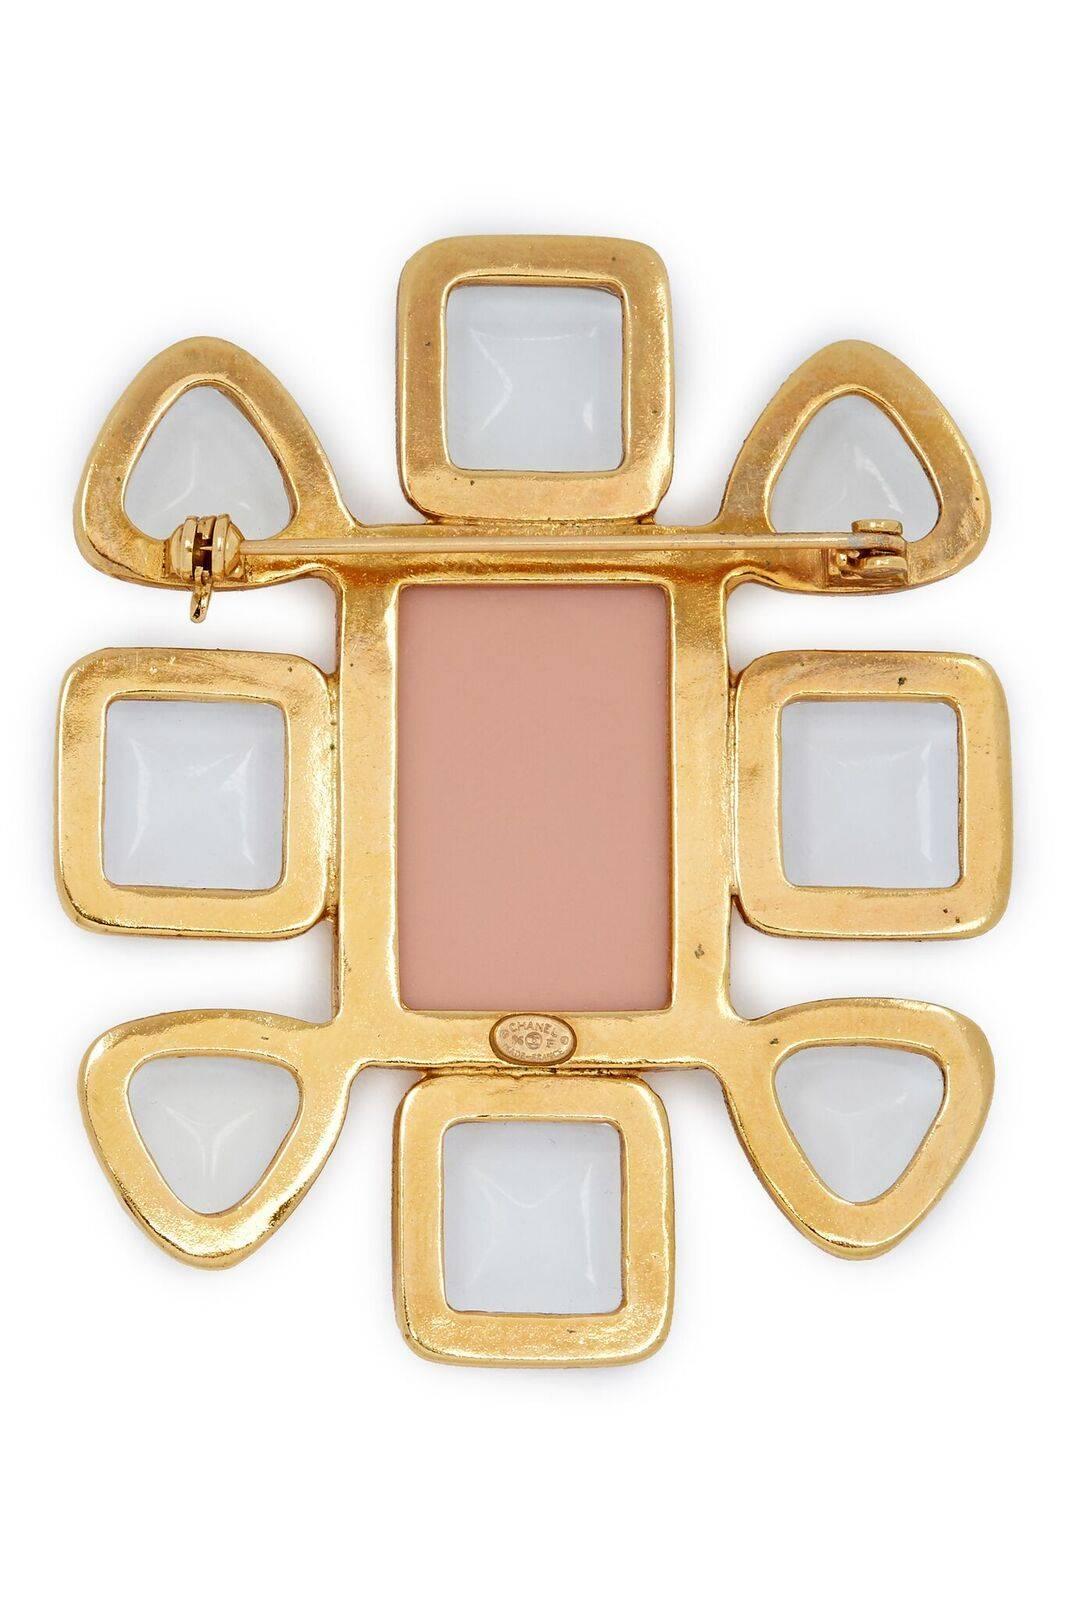 Gold-tone Chanel brooch featuring clear glass (gripoix) cabochons, rose enamel centrepiece with a small double CC affixed to the centre. C clasp pin closure. From the Spring 1996 Collection. 

In excellent vintage condition.

2 1/4 inches/6.5cm wide